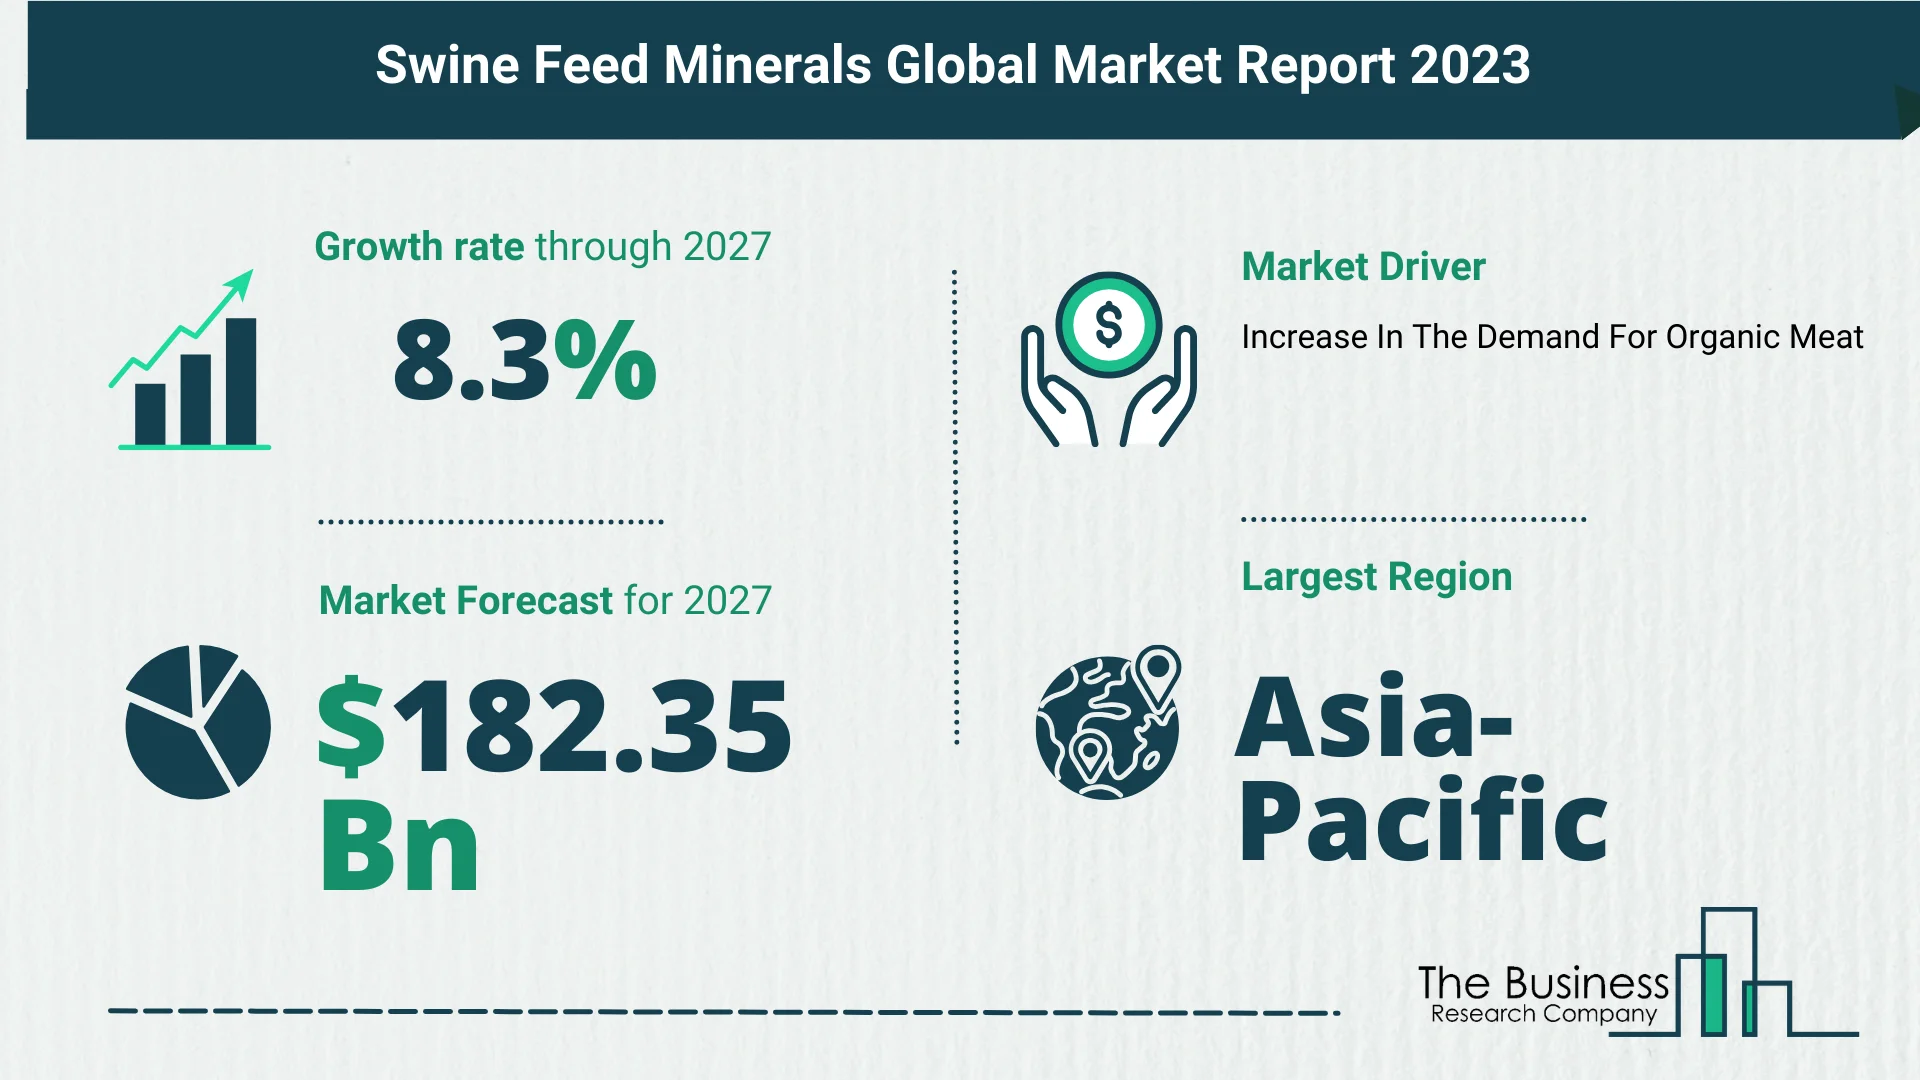 What Is The Forecast Growth Rate For The Swine Feed Minerals Market?